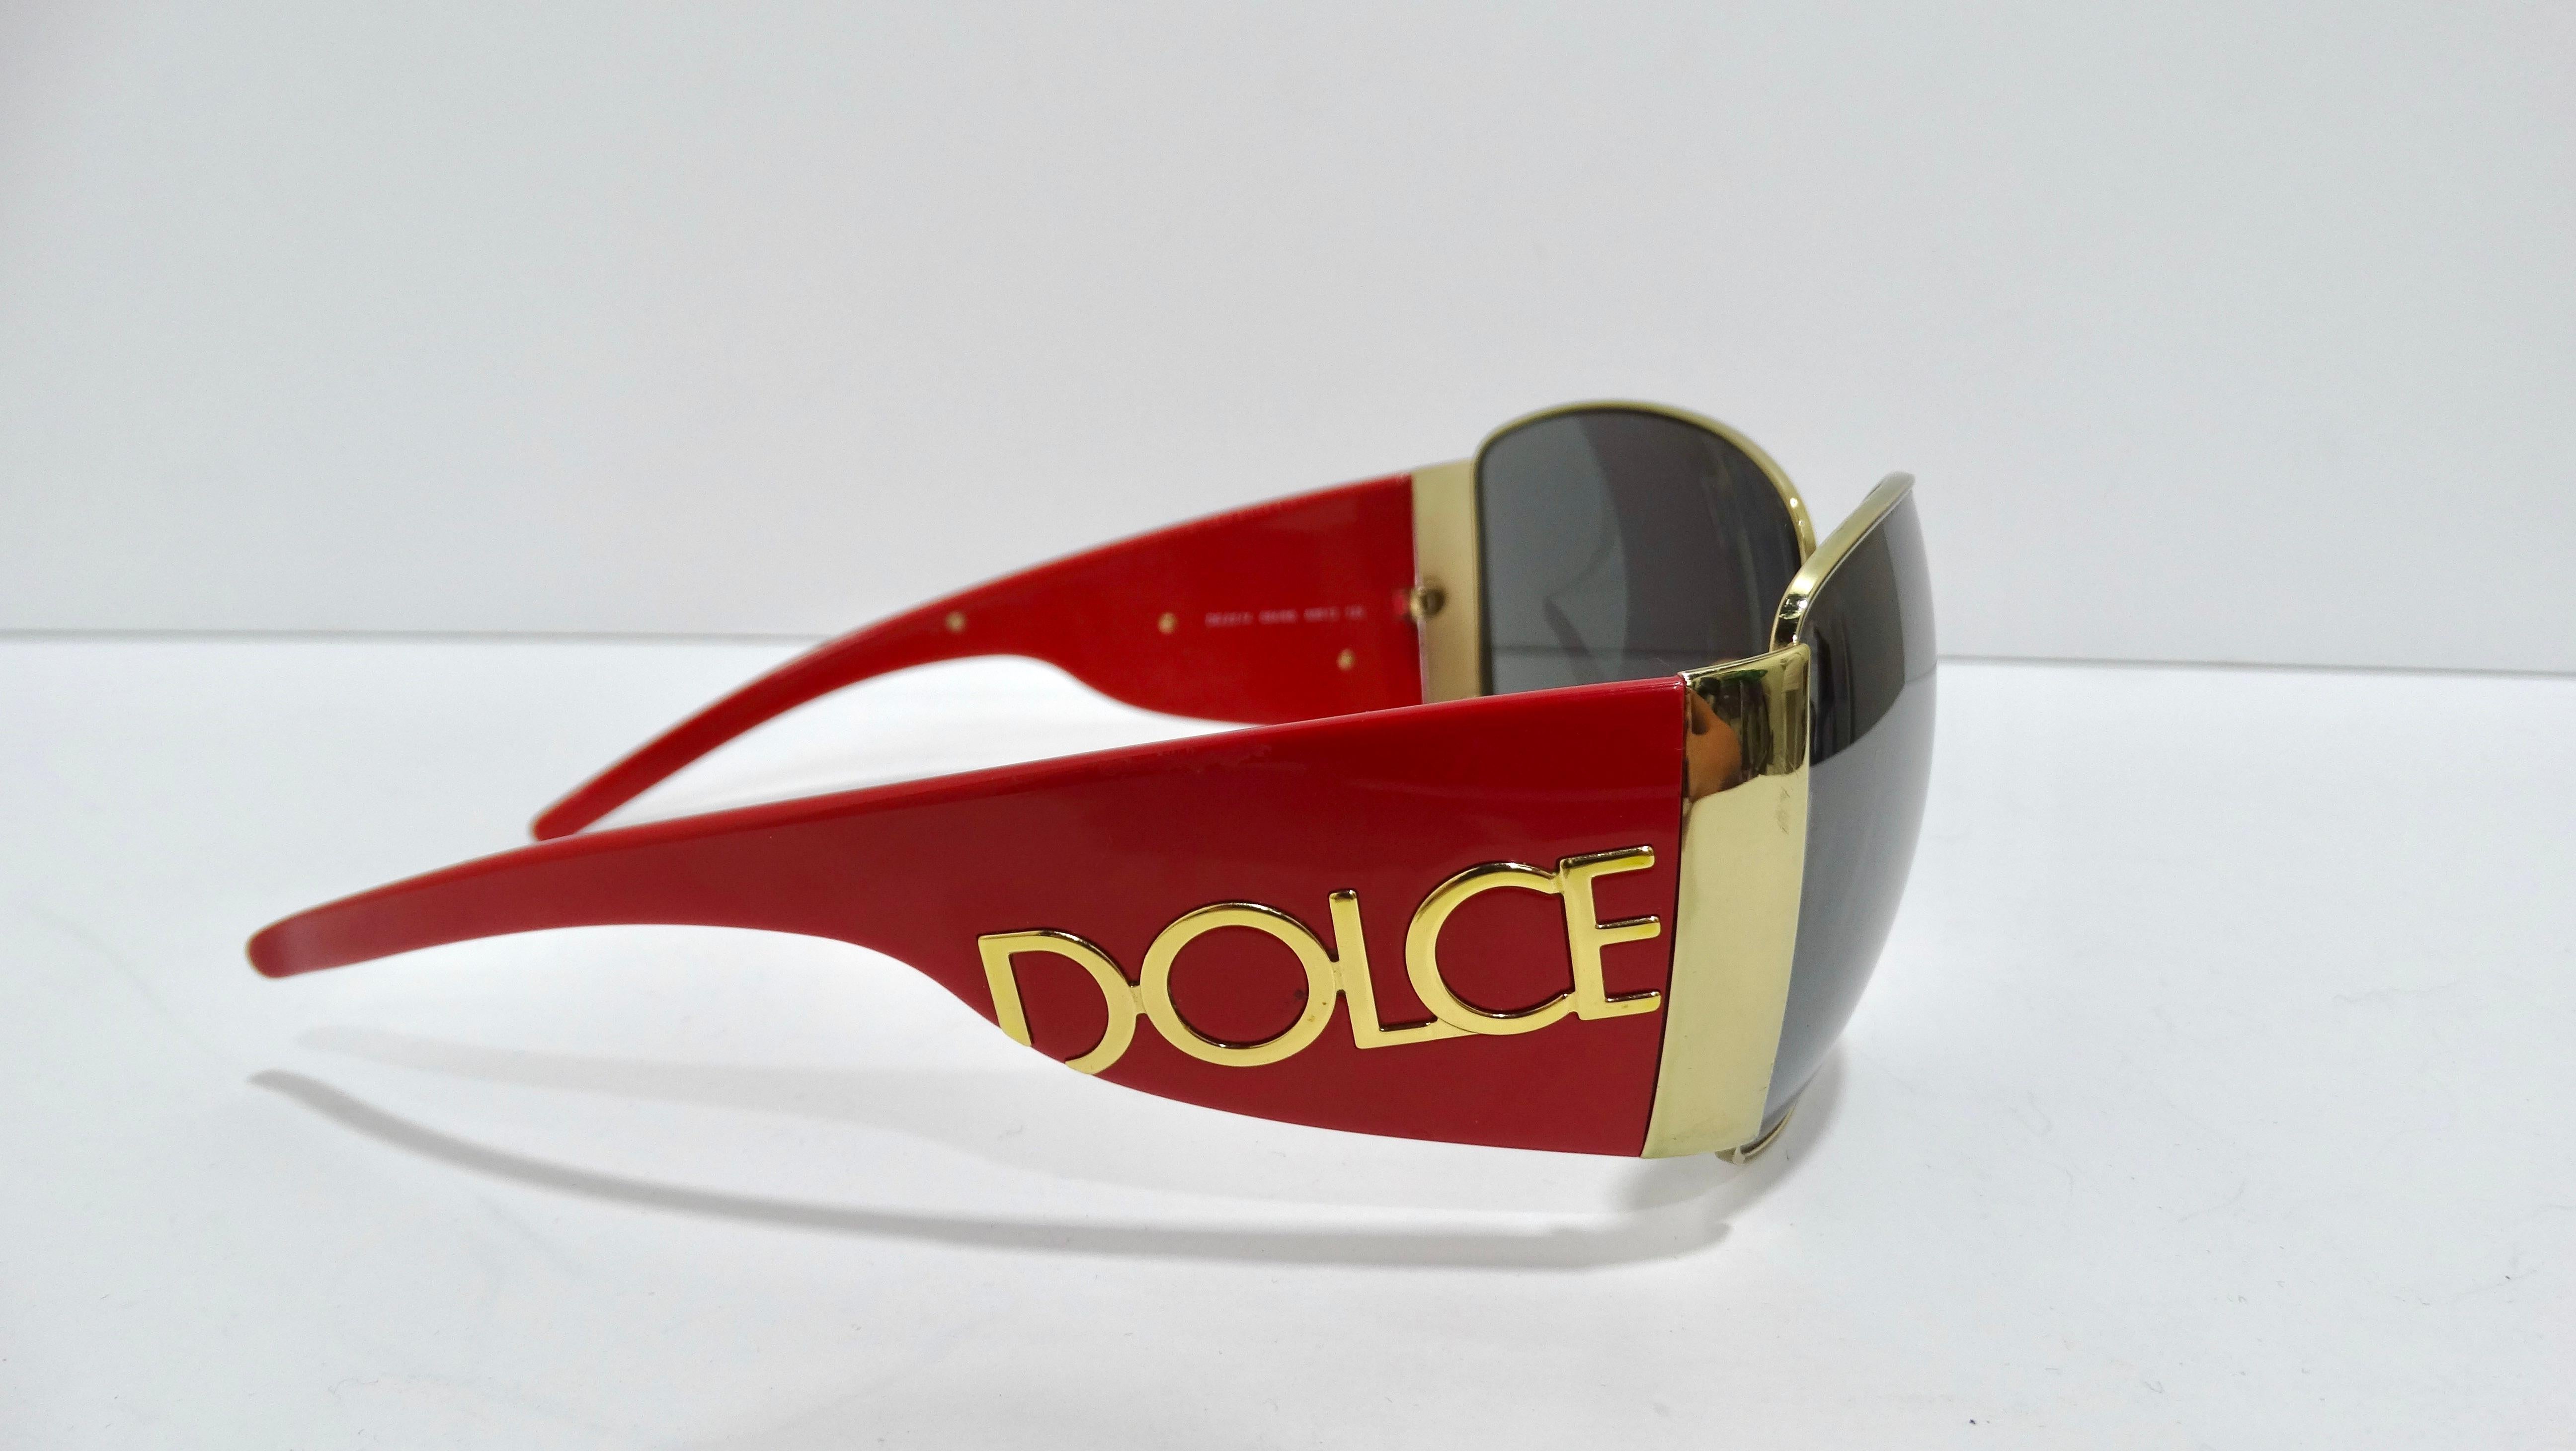 These Dolce & Gabbana sunglasses will make you the most stylish person in the room. The oversized frames and the bold branding will make a statement. These sunglasses are in a red hot color, with grey tinted lenses, 'DOLCE' in gold on the left side